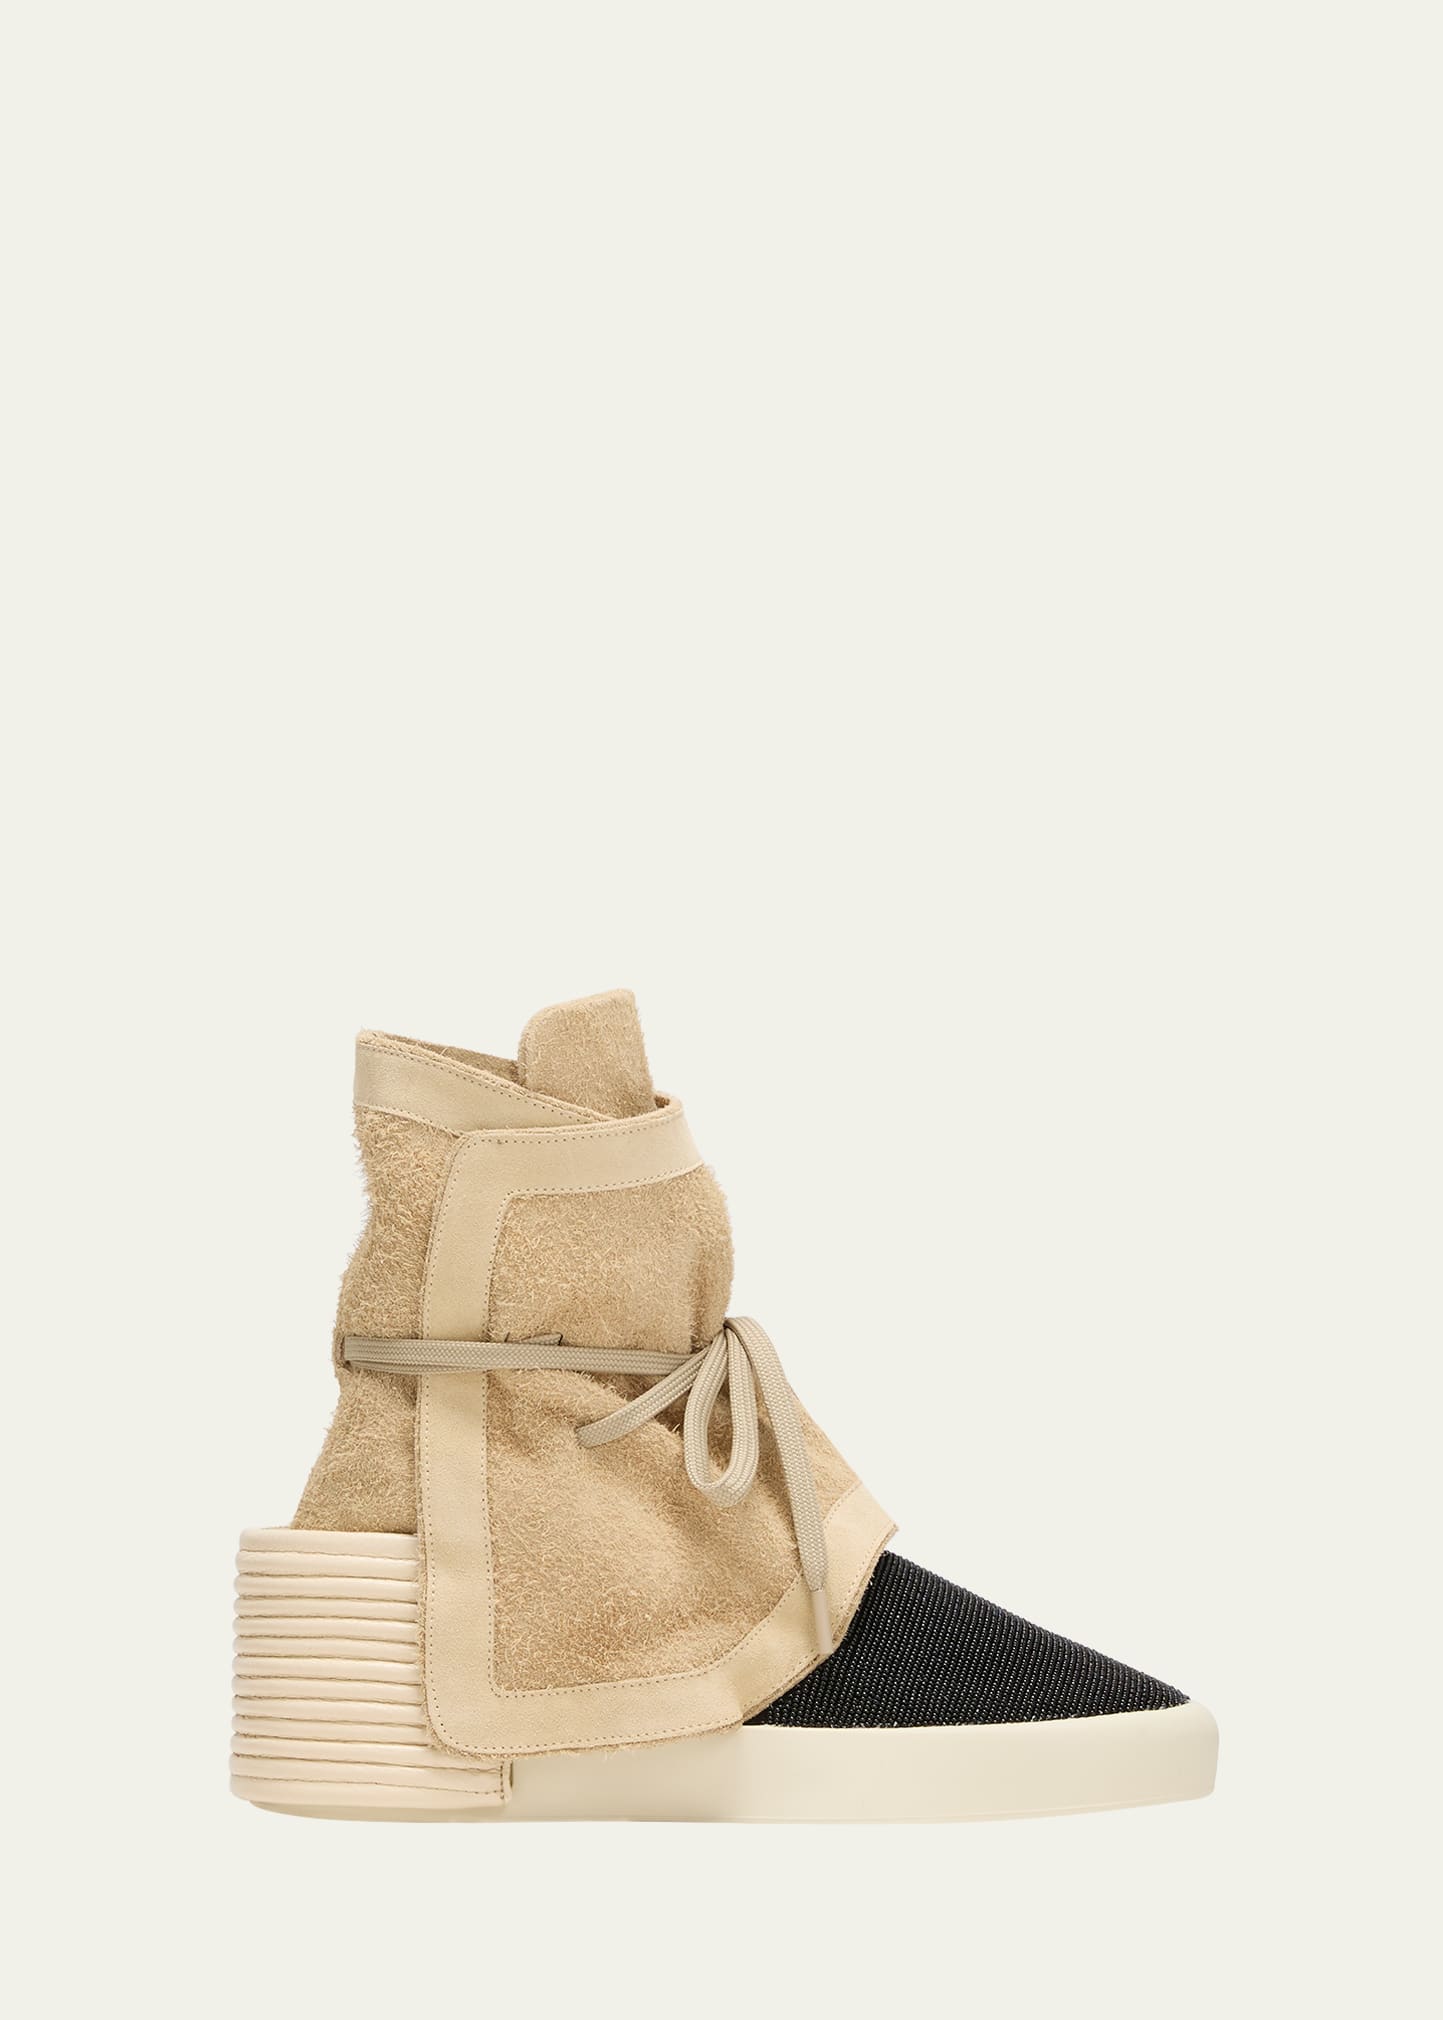 Fear Of God Men's Hairy Suede Moc High-top Sneakers In Natural/black